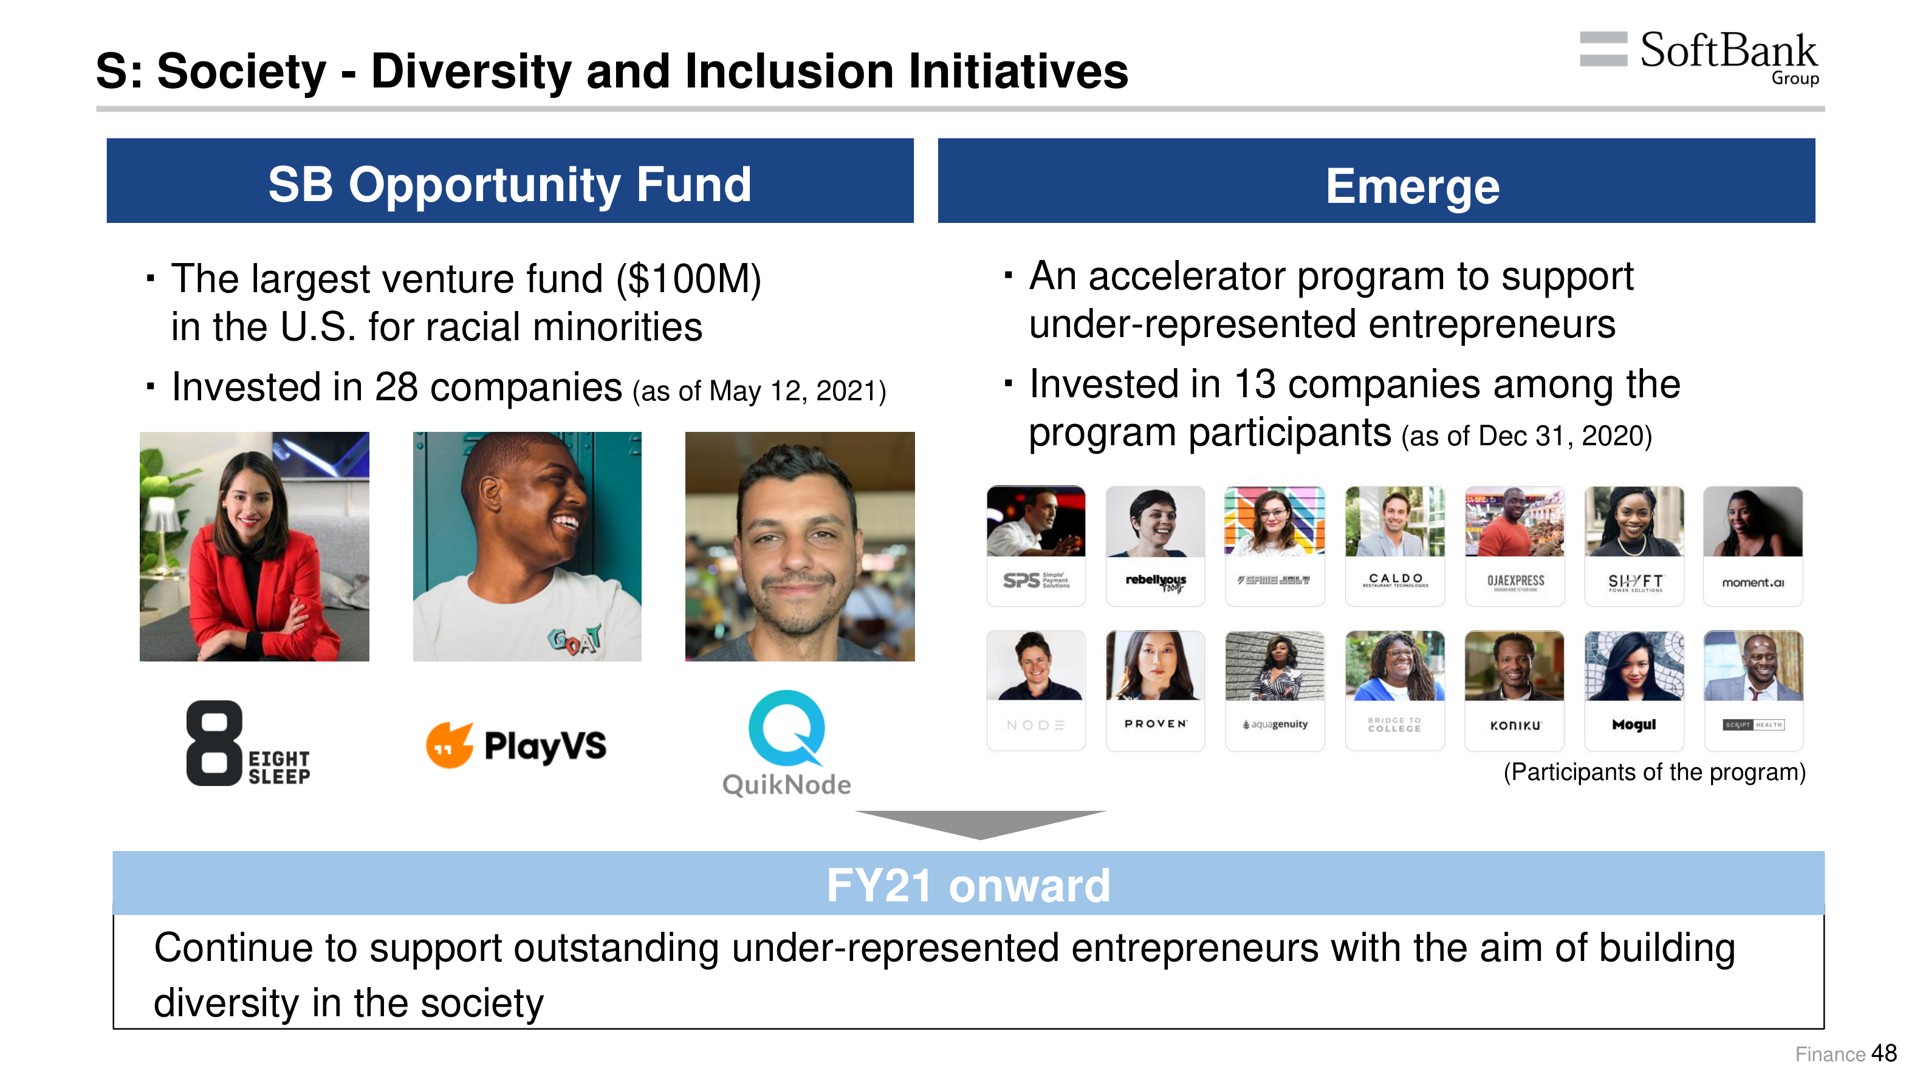 society diversity and inclusion initiatives opportunity fund emerge the venture fund in the for racial minorities invested in companies as of may an accelerator program to support under represented entrepreneurs invested in companies among the onward continue to support outstanding under represented entrepreneurs with the aim of building diversity in the society roup | SoftBank